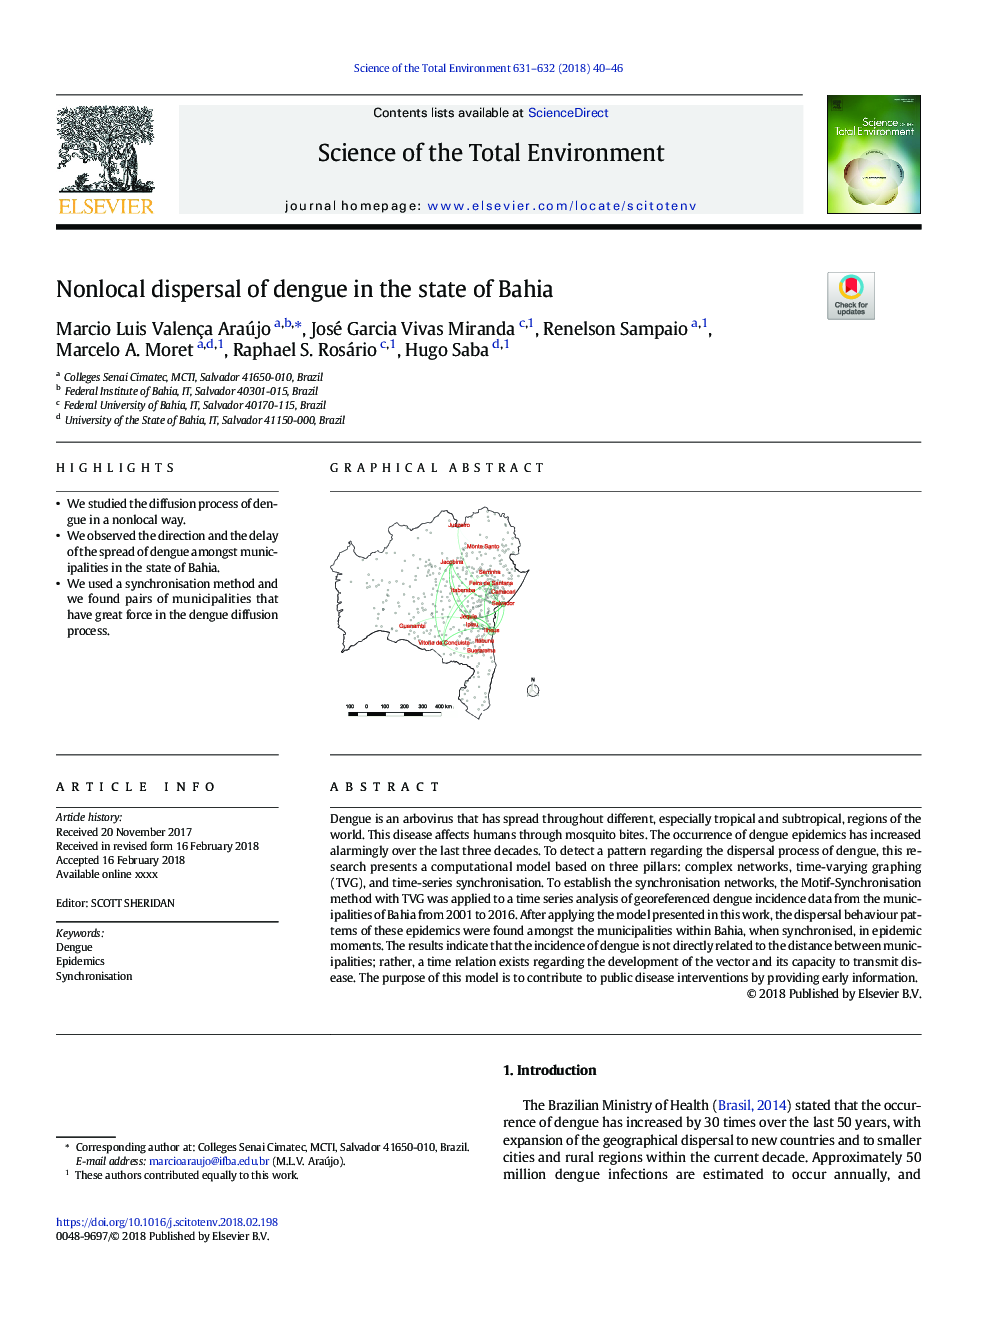 Nonlocal dispersal of dengue in the state of Bahia